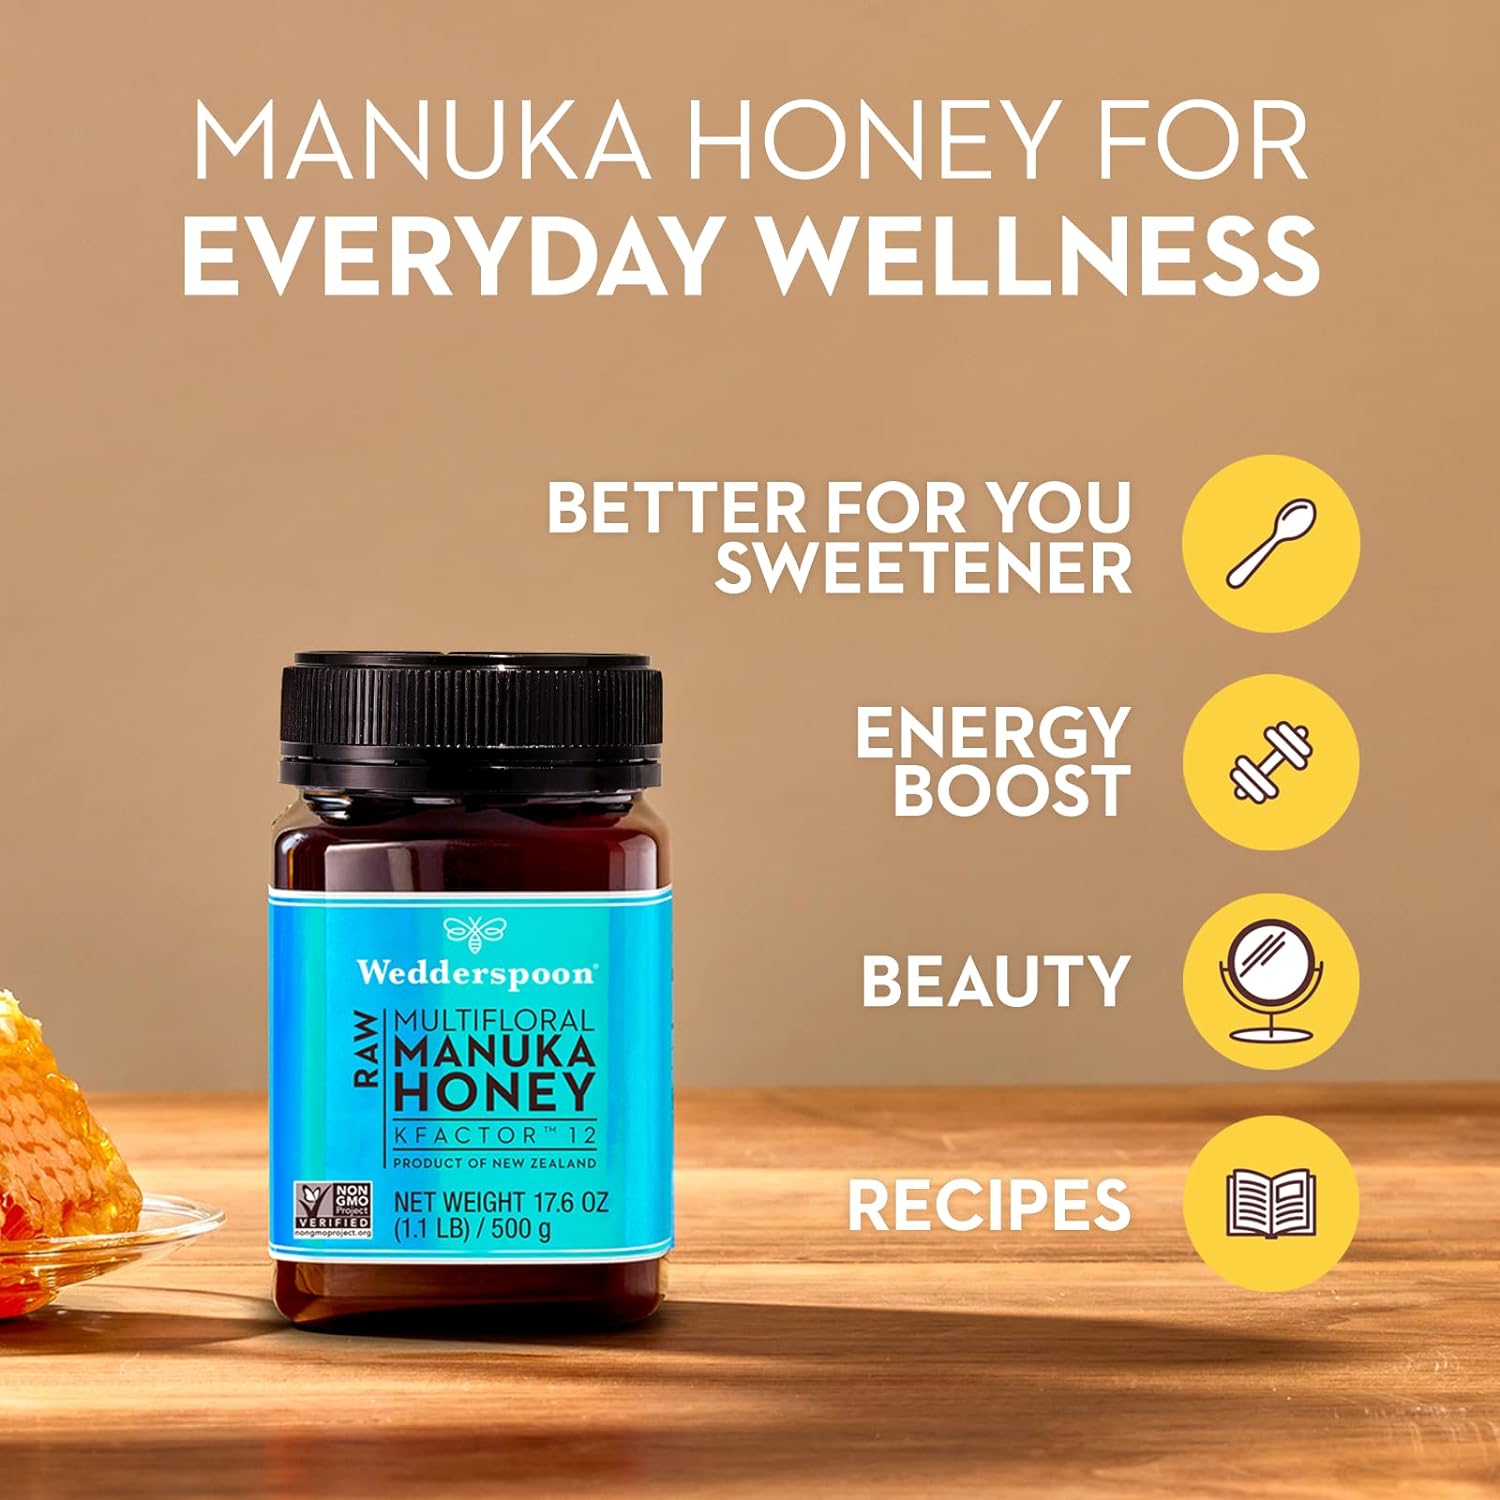 Wedderspoon Raw Premium Manuka Honey, KFactor 12, 8.8 Oz, Unpasteurized, Genuine New Zealand Honey, Non-GMO Superfood, Traceable from Our Hives to Your Home : Grocery & Gourmet Food